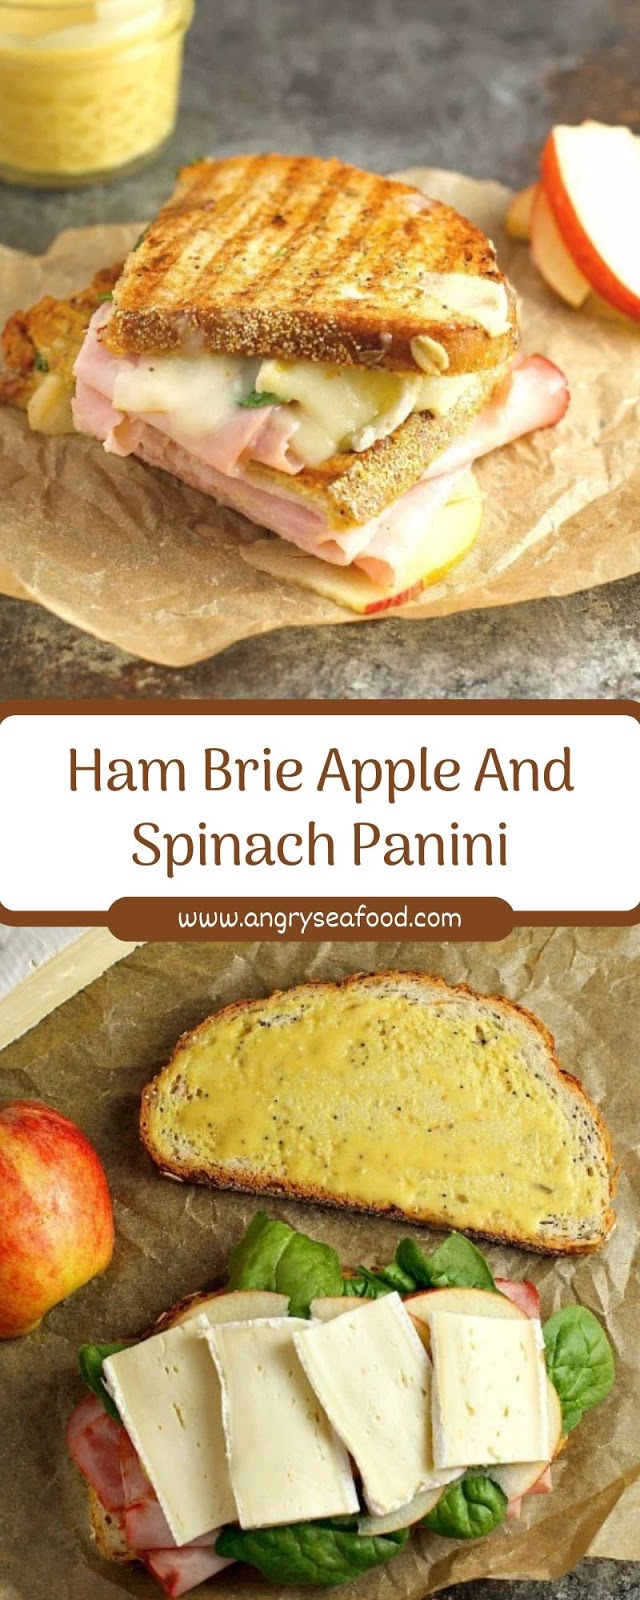 Ham Brie Apple And Spinach Panini